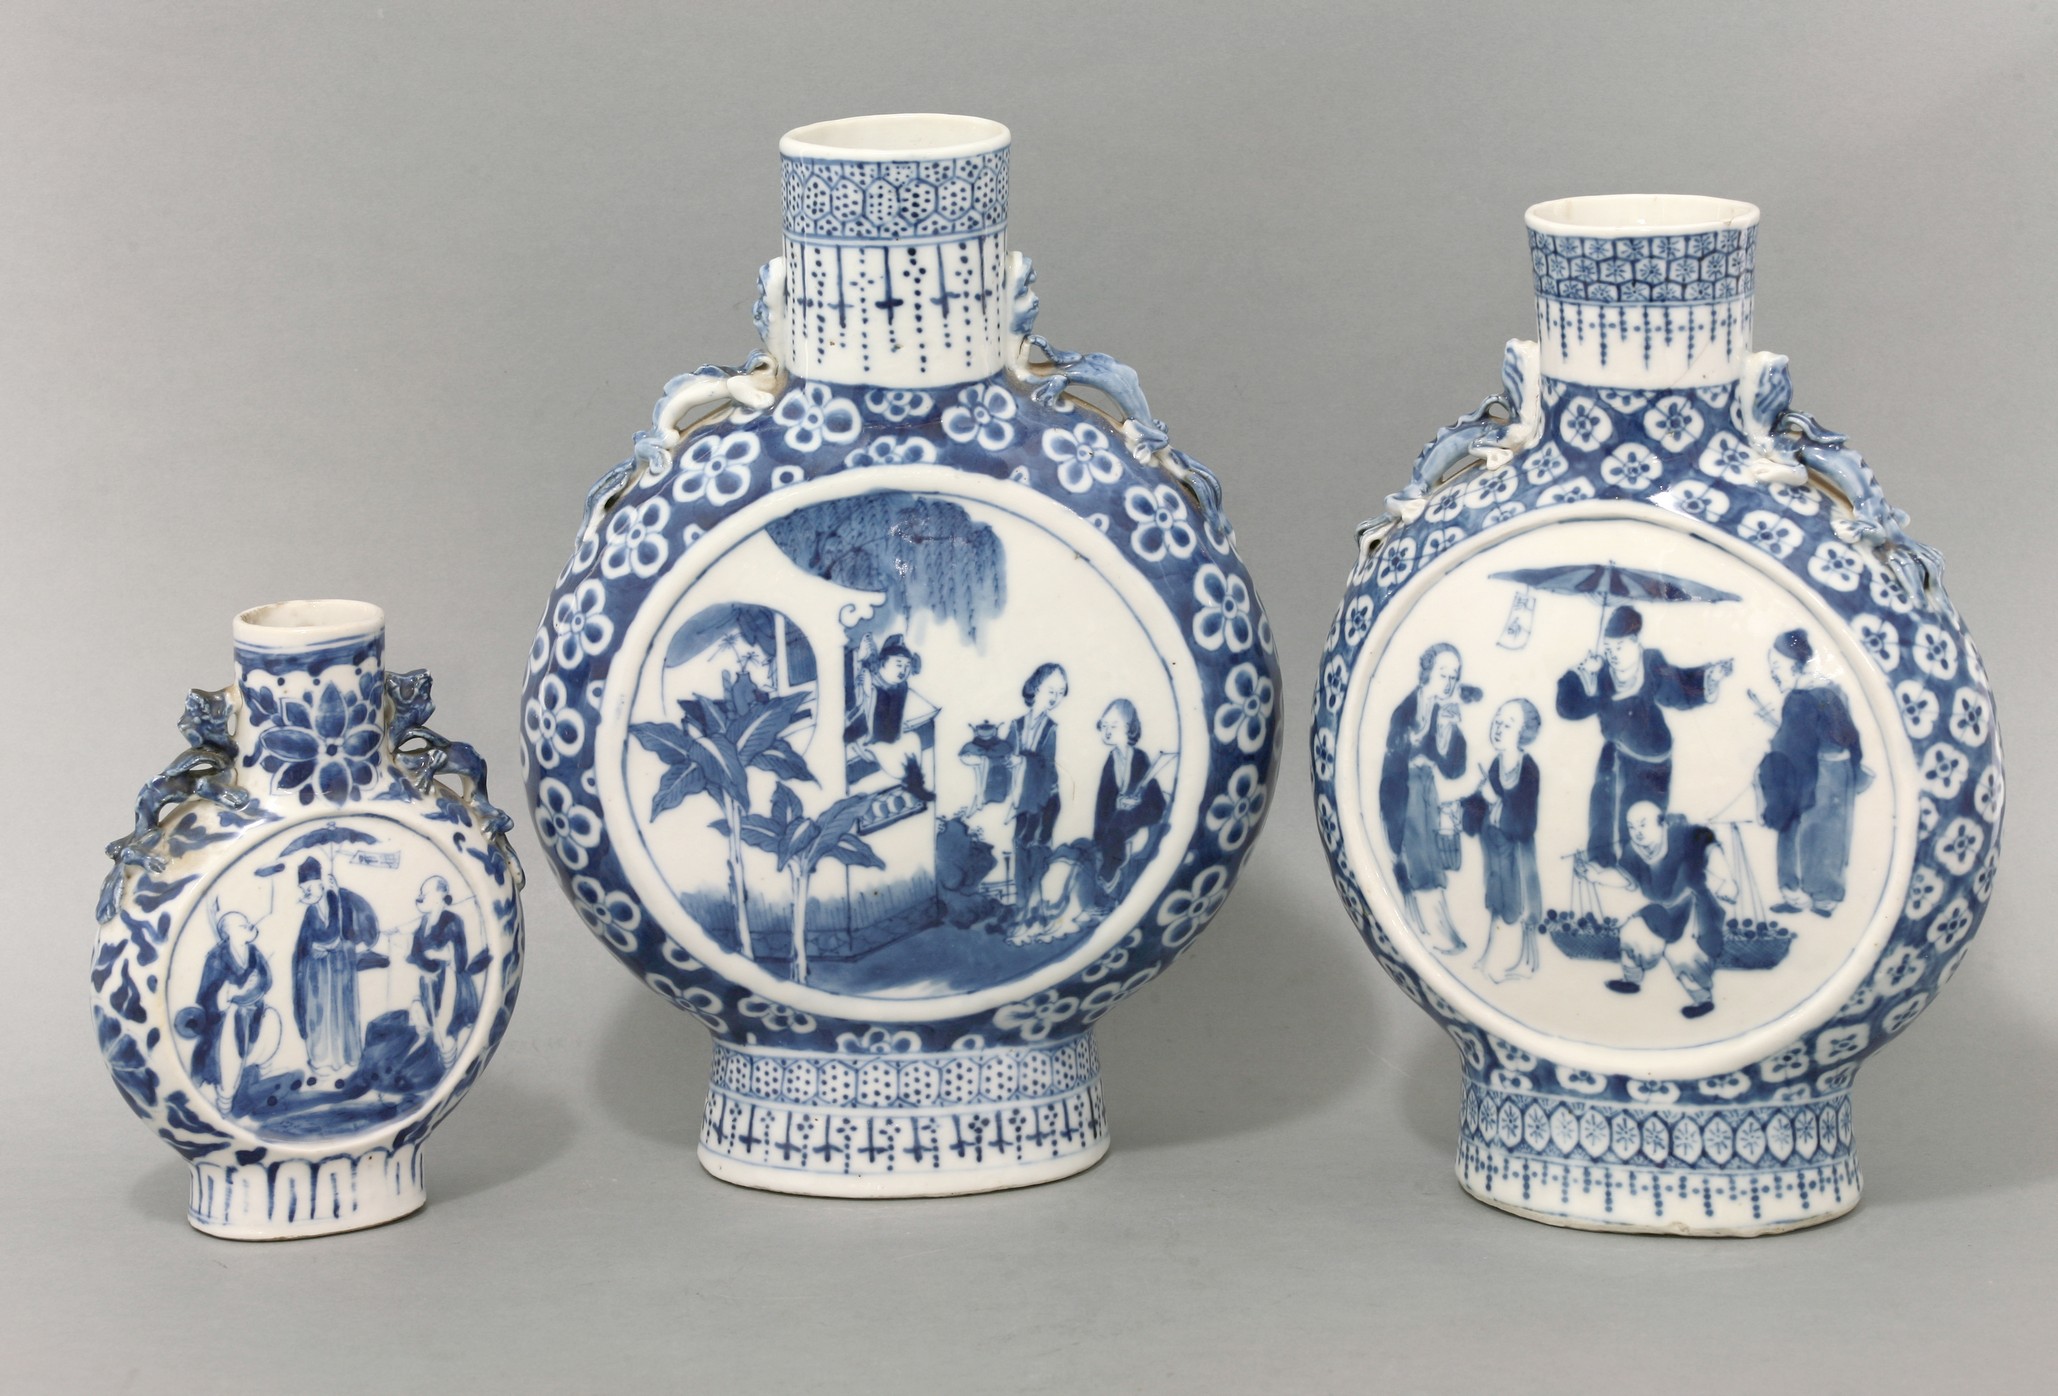 Three blue and white Moon Flasks,
late 19th century, one with a scene from 'The Western Wing', the